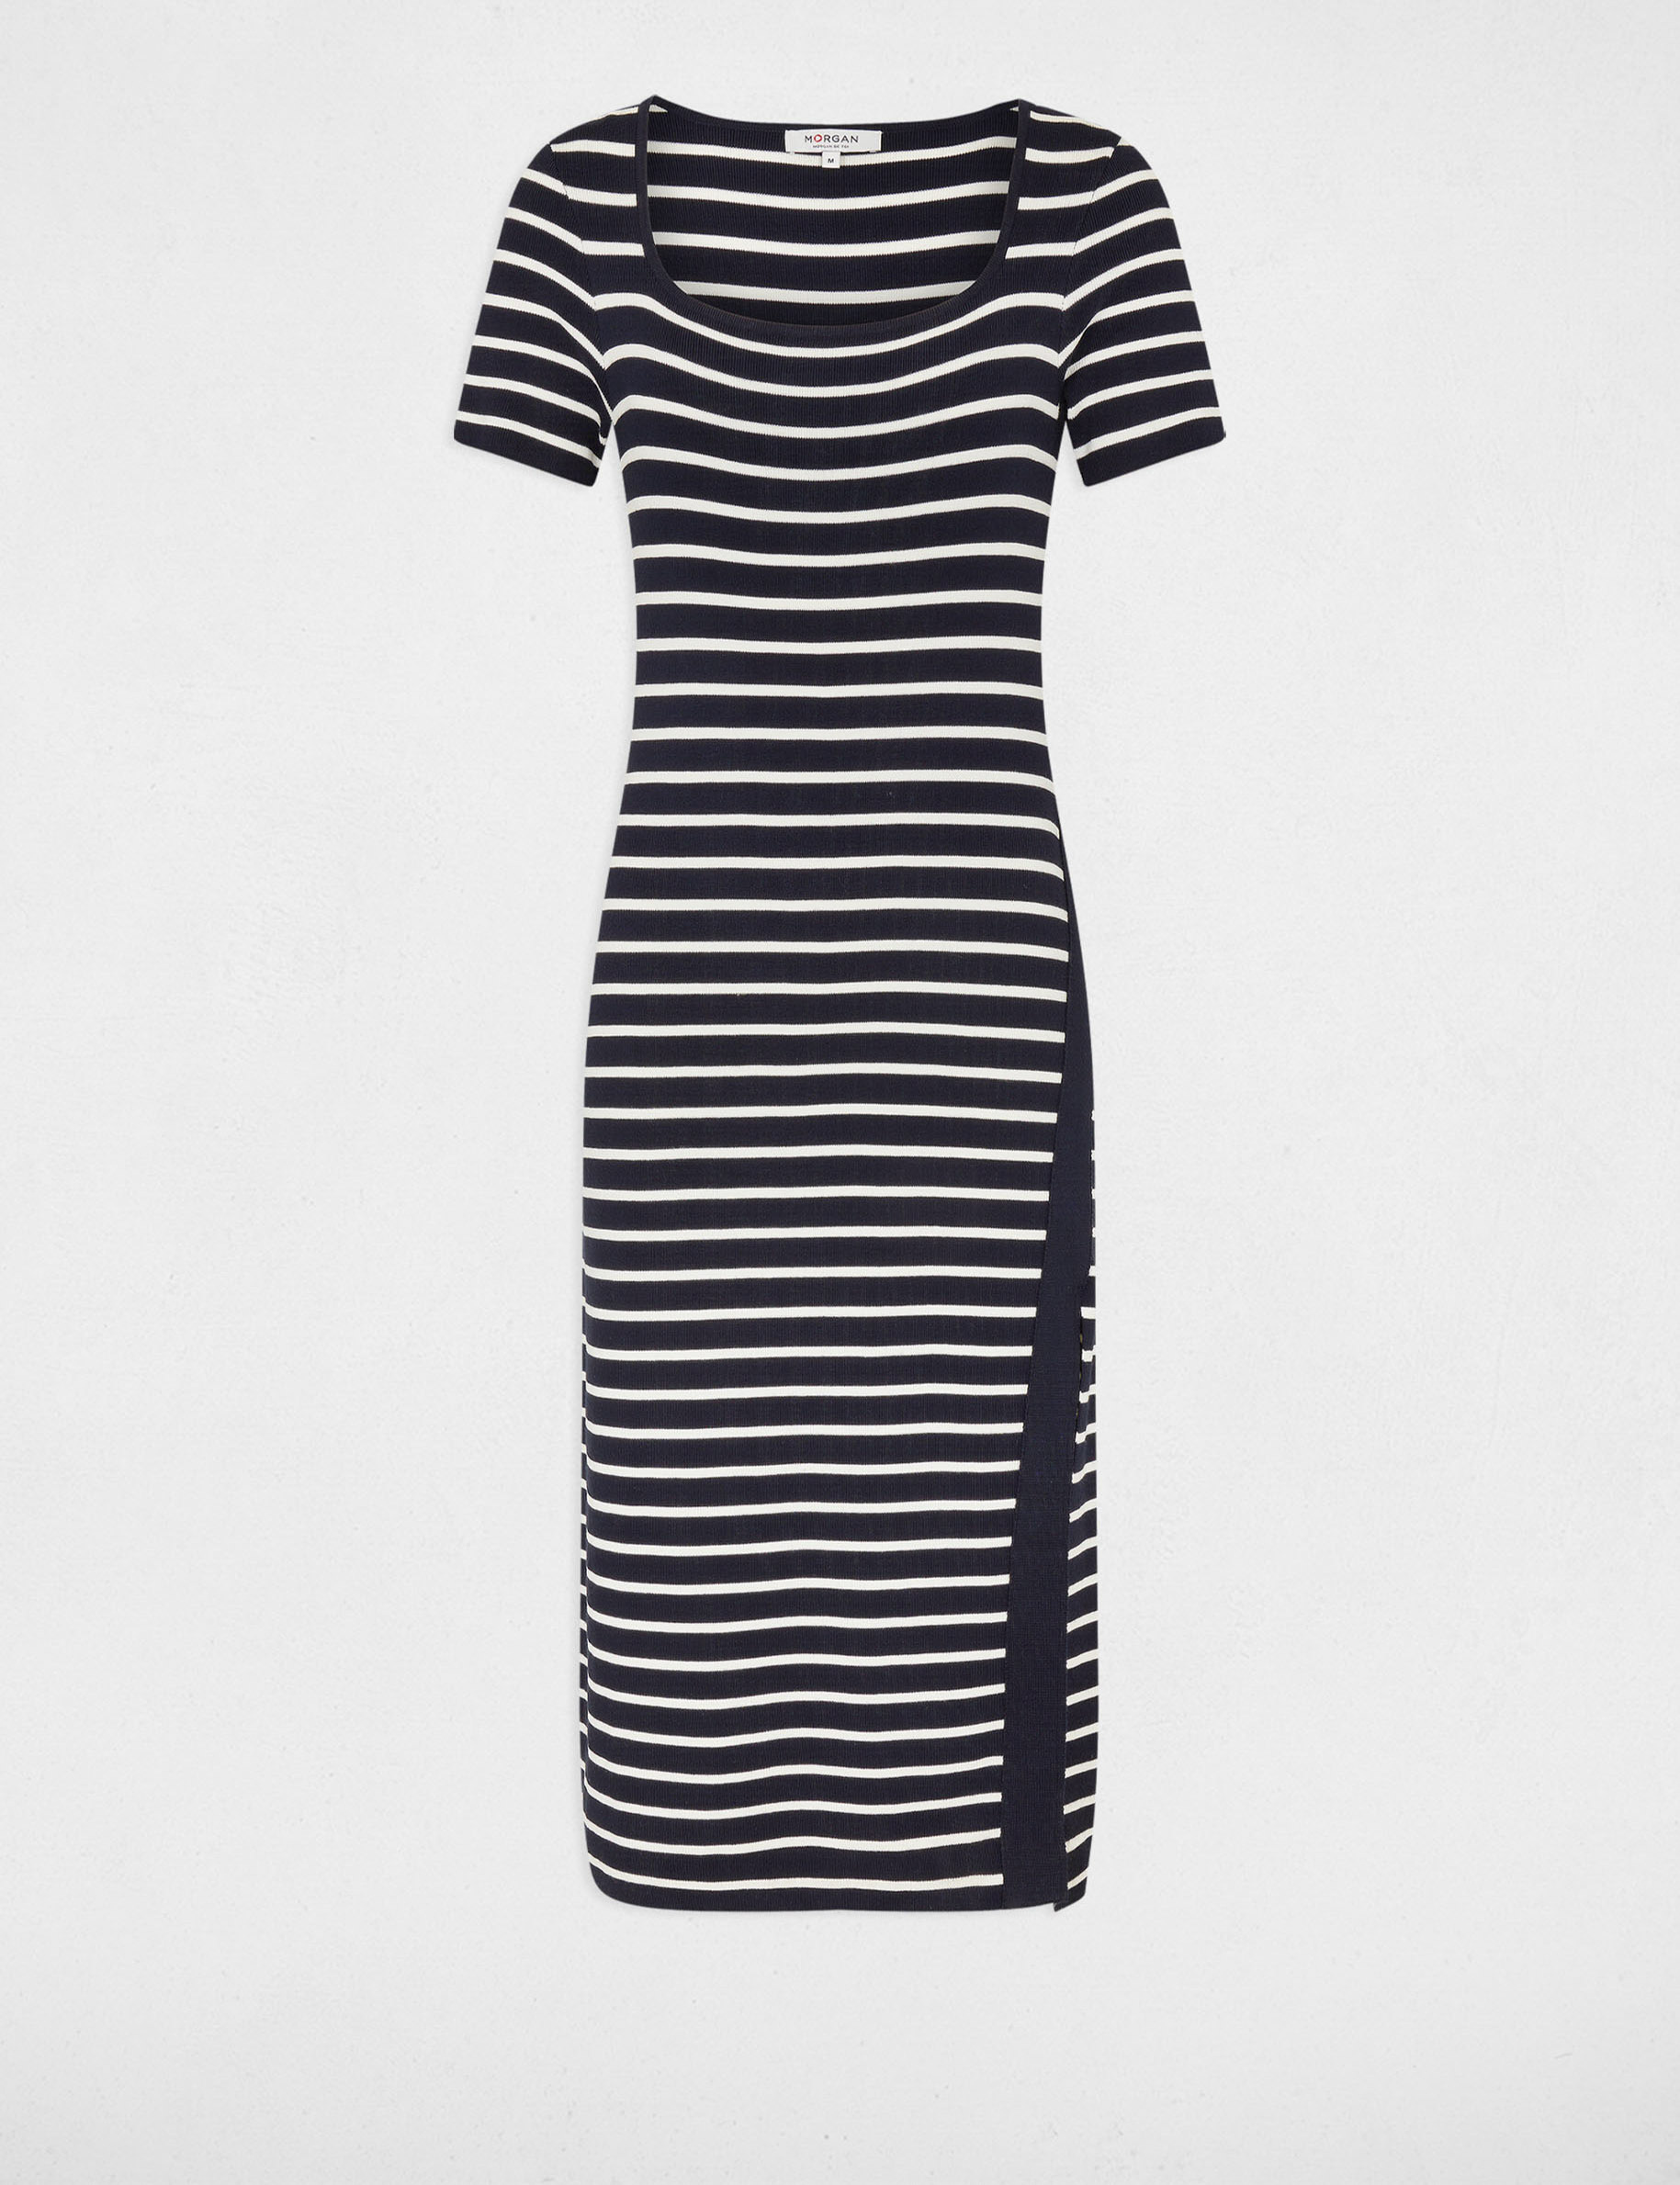 Stripped midi knitted dress navy ladies'